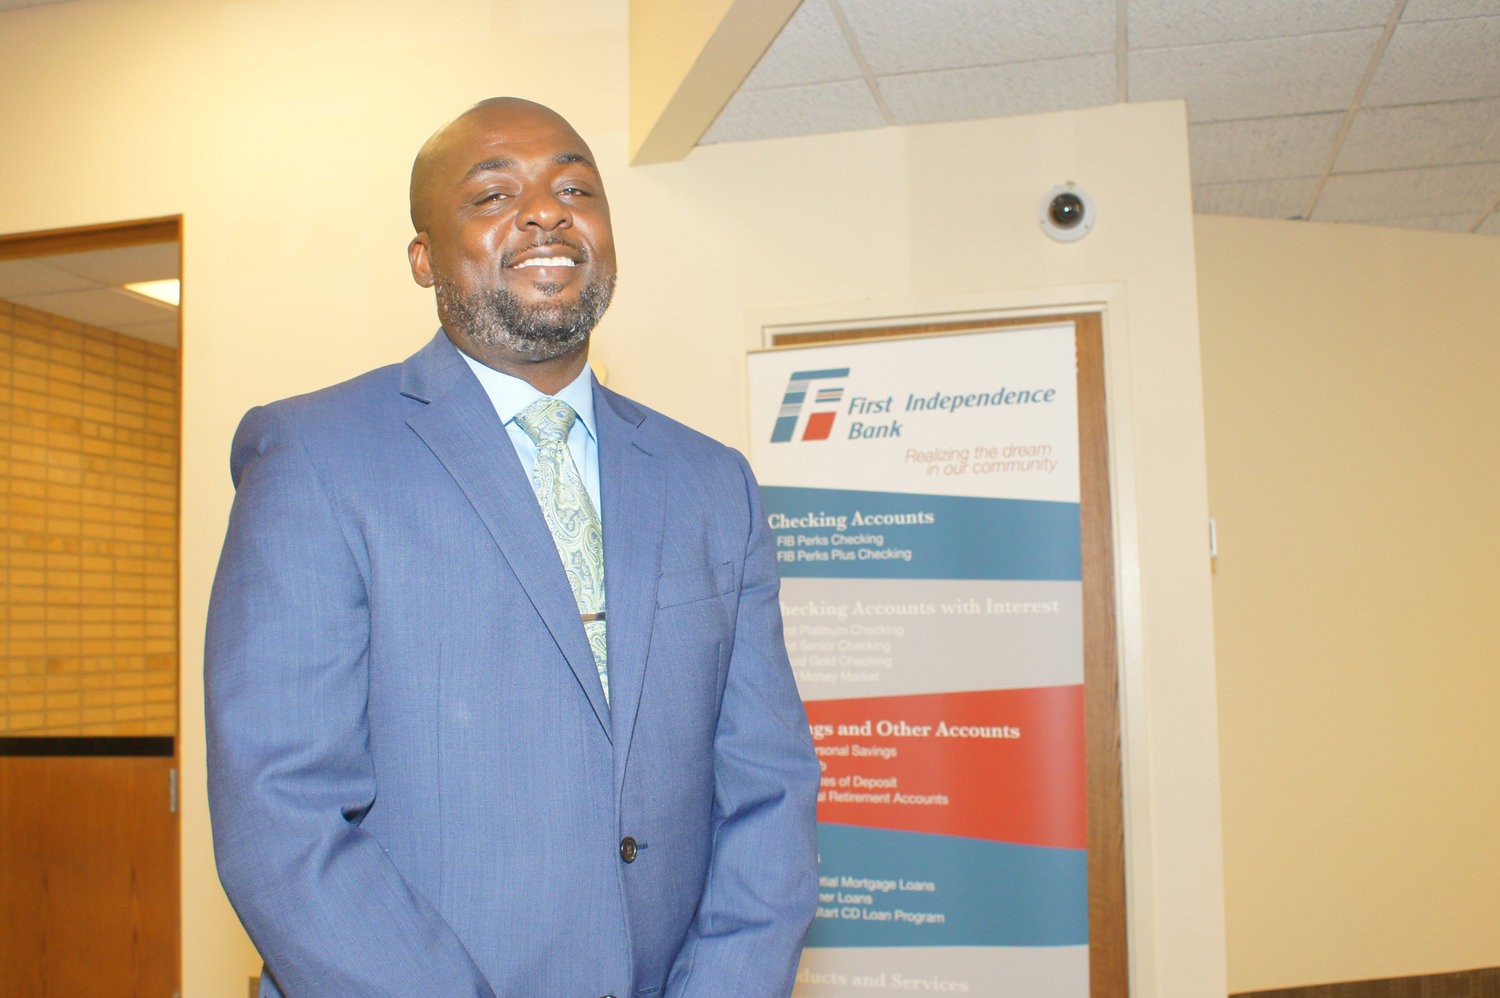 "This is an opportunity for our local Black community to have its own institution; something  that can be a source of pride for our people.  But it can also be a point of pride for the broader community to know that we have First Independence right here in our midst," said Damon Jenkins of the First Independence Bank. (Photo by Terry Faust)